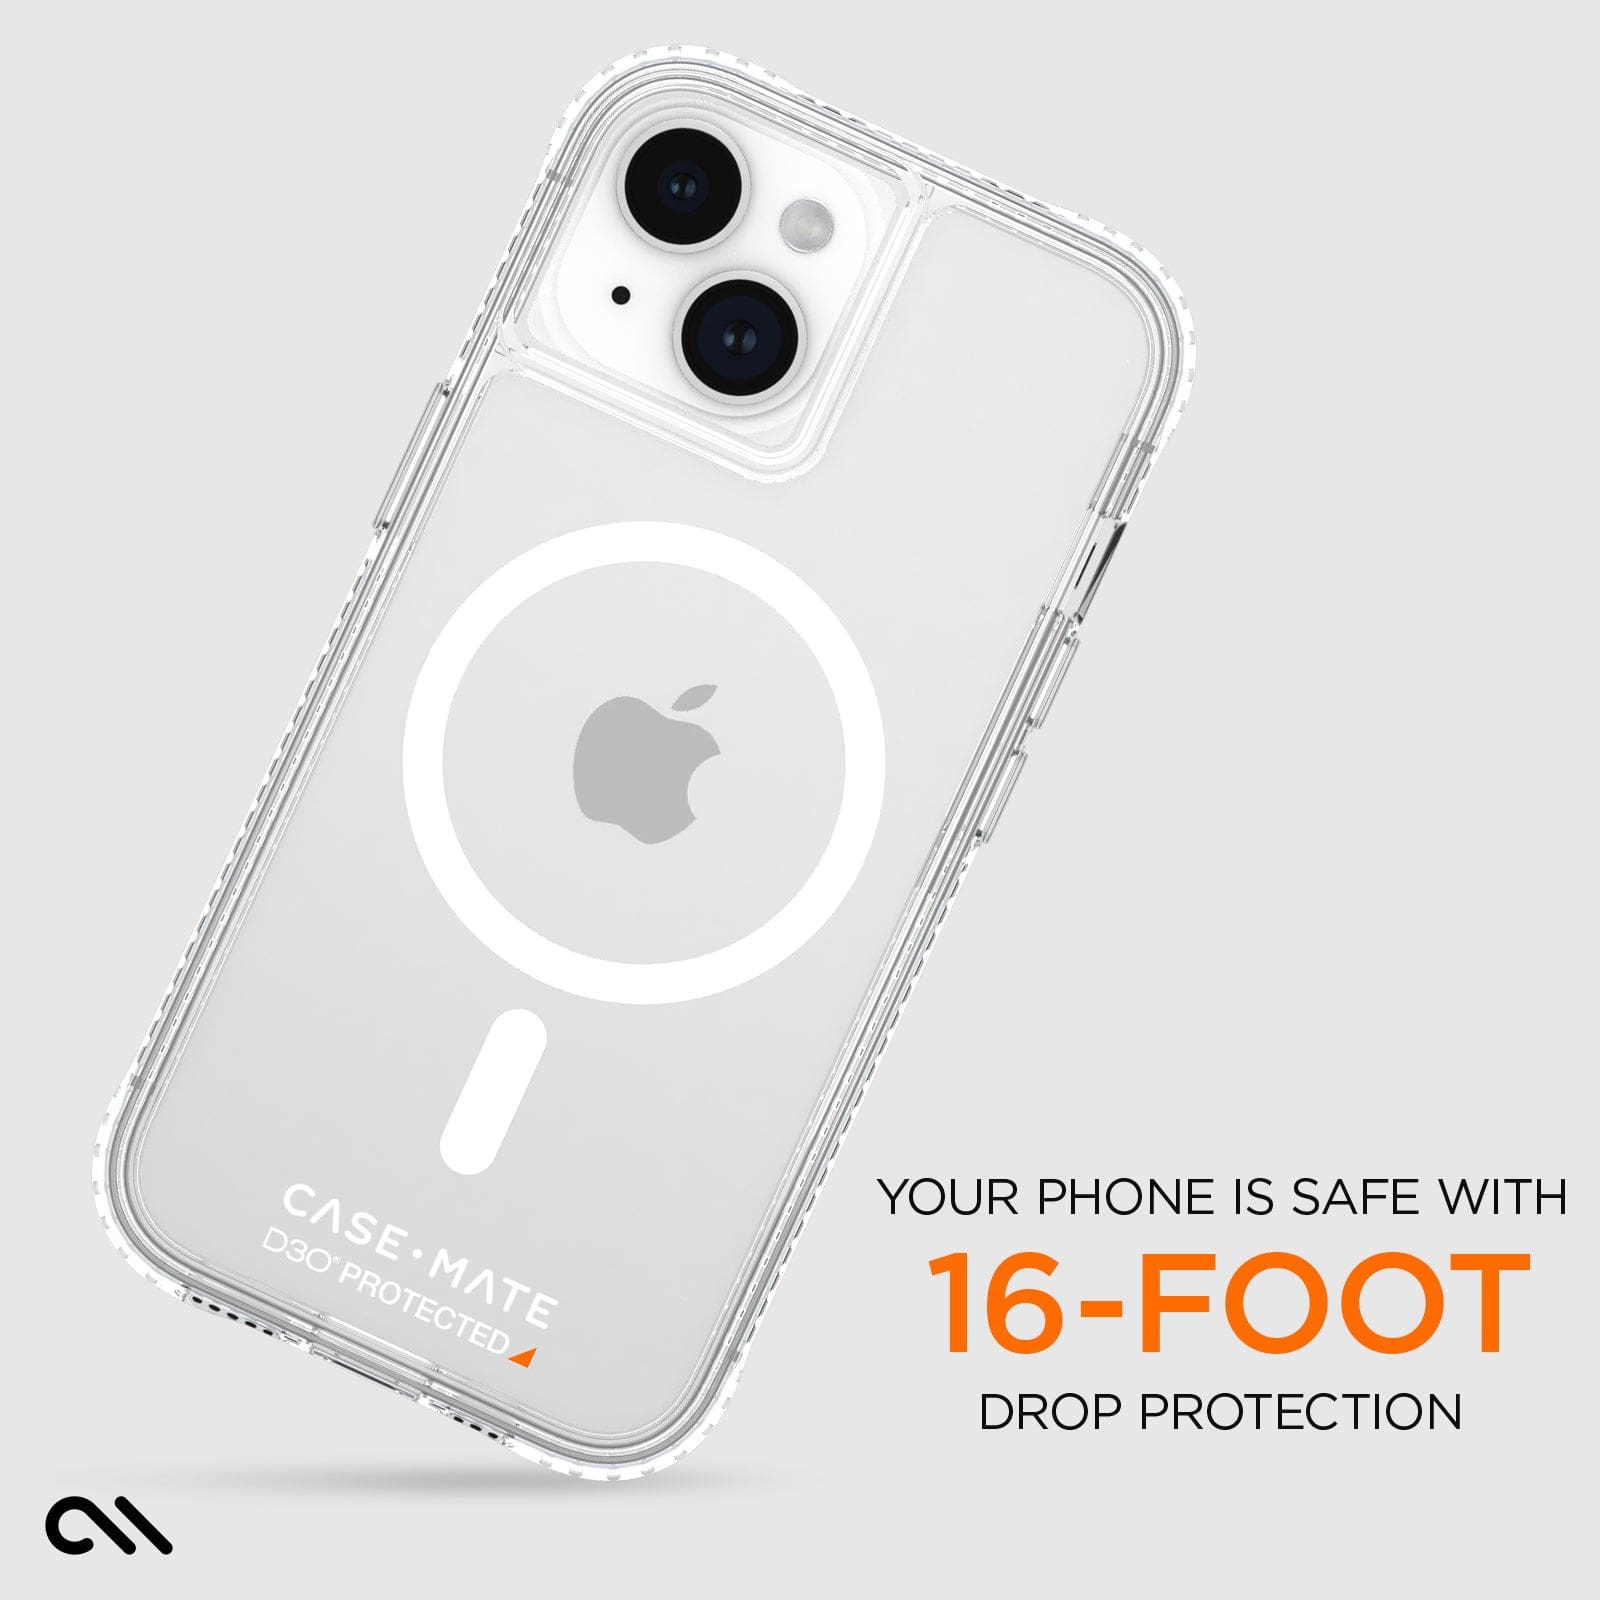 YOUR PHONE IS SAFE WITH 16 FOOT DROP PROTECTION